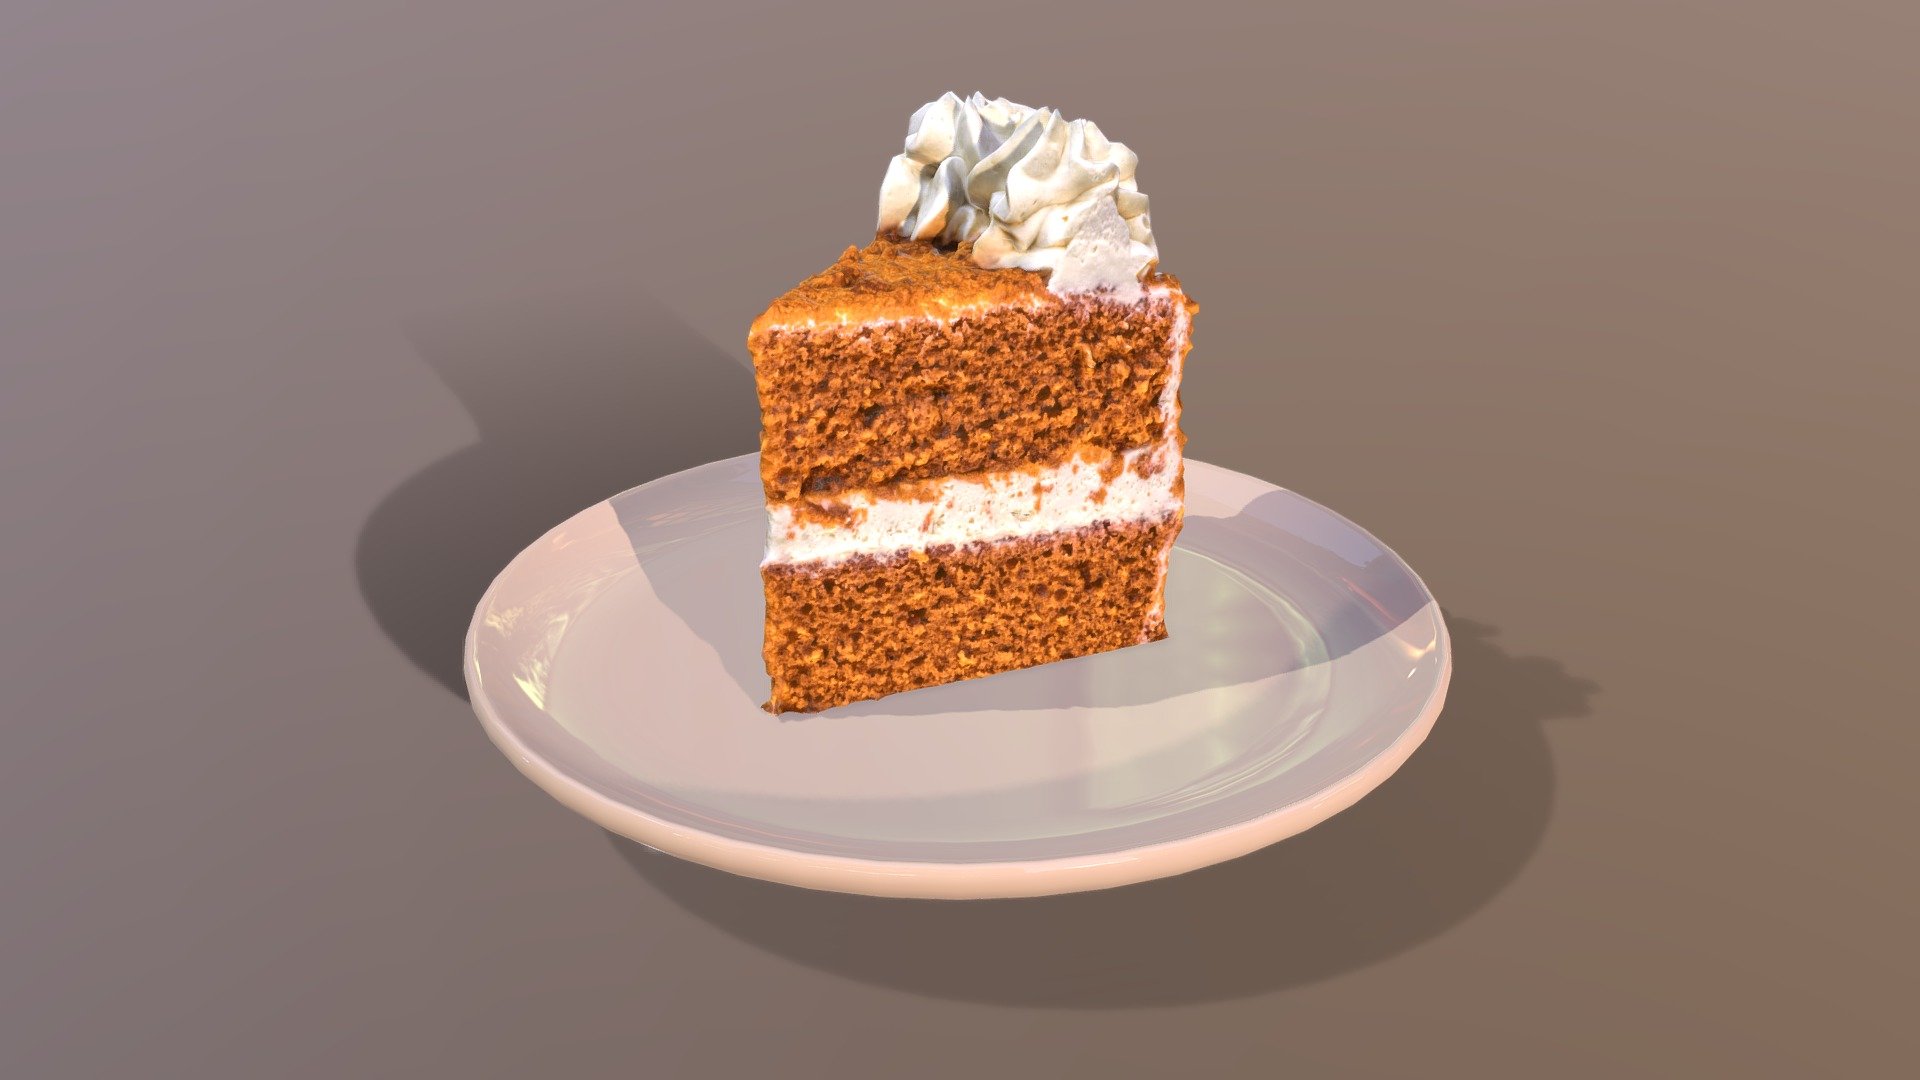 This premium Caramel Cake model was created using photogrammetry which is made by CAKESBURG Premium Cake Shop in the UK. You can purchase real cake from this link: https://cakesburg.co.uk/products/red-velvet-buttercream-cake?_pos=2&amp;_sid=a9ff9af21&amp;_ss=r

Textures 4096*4096px PBR photoscan-based materials Base Color, Normal, Roughness, Specular)Published by 3ds Max

Click here for the uncut version.

Click here for the cut &amp; slice version 3d model